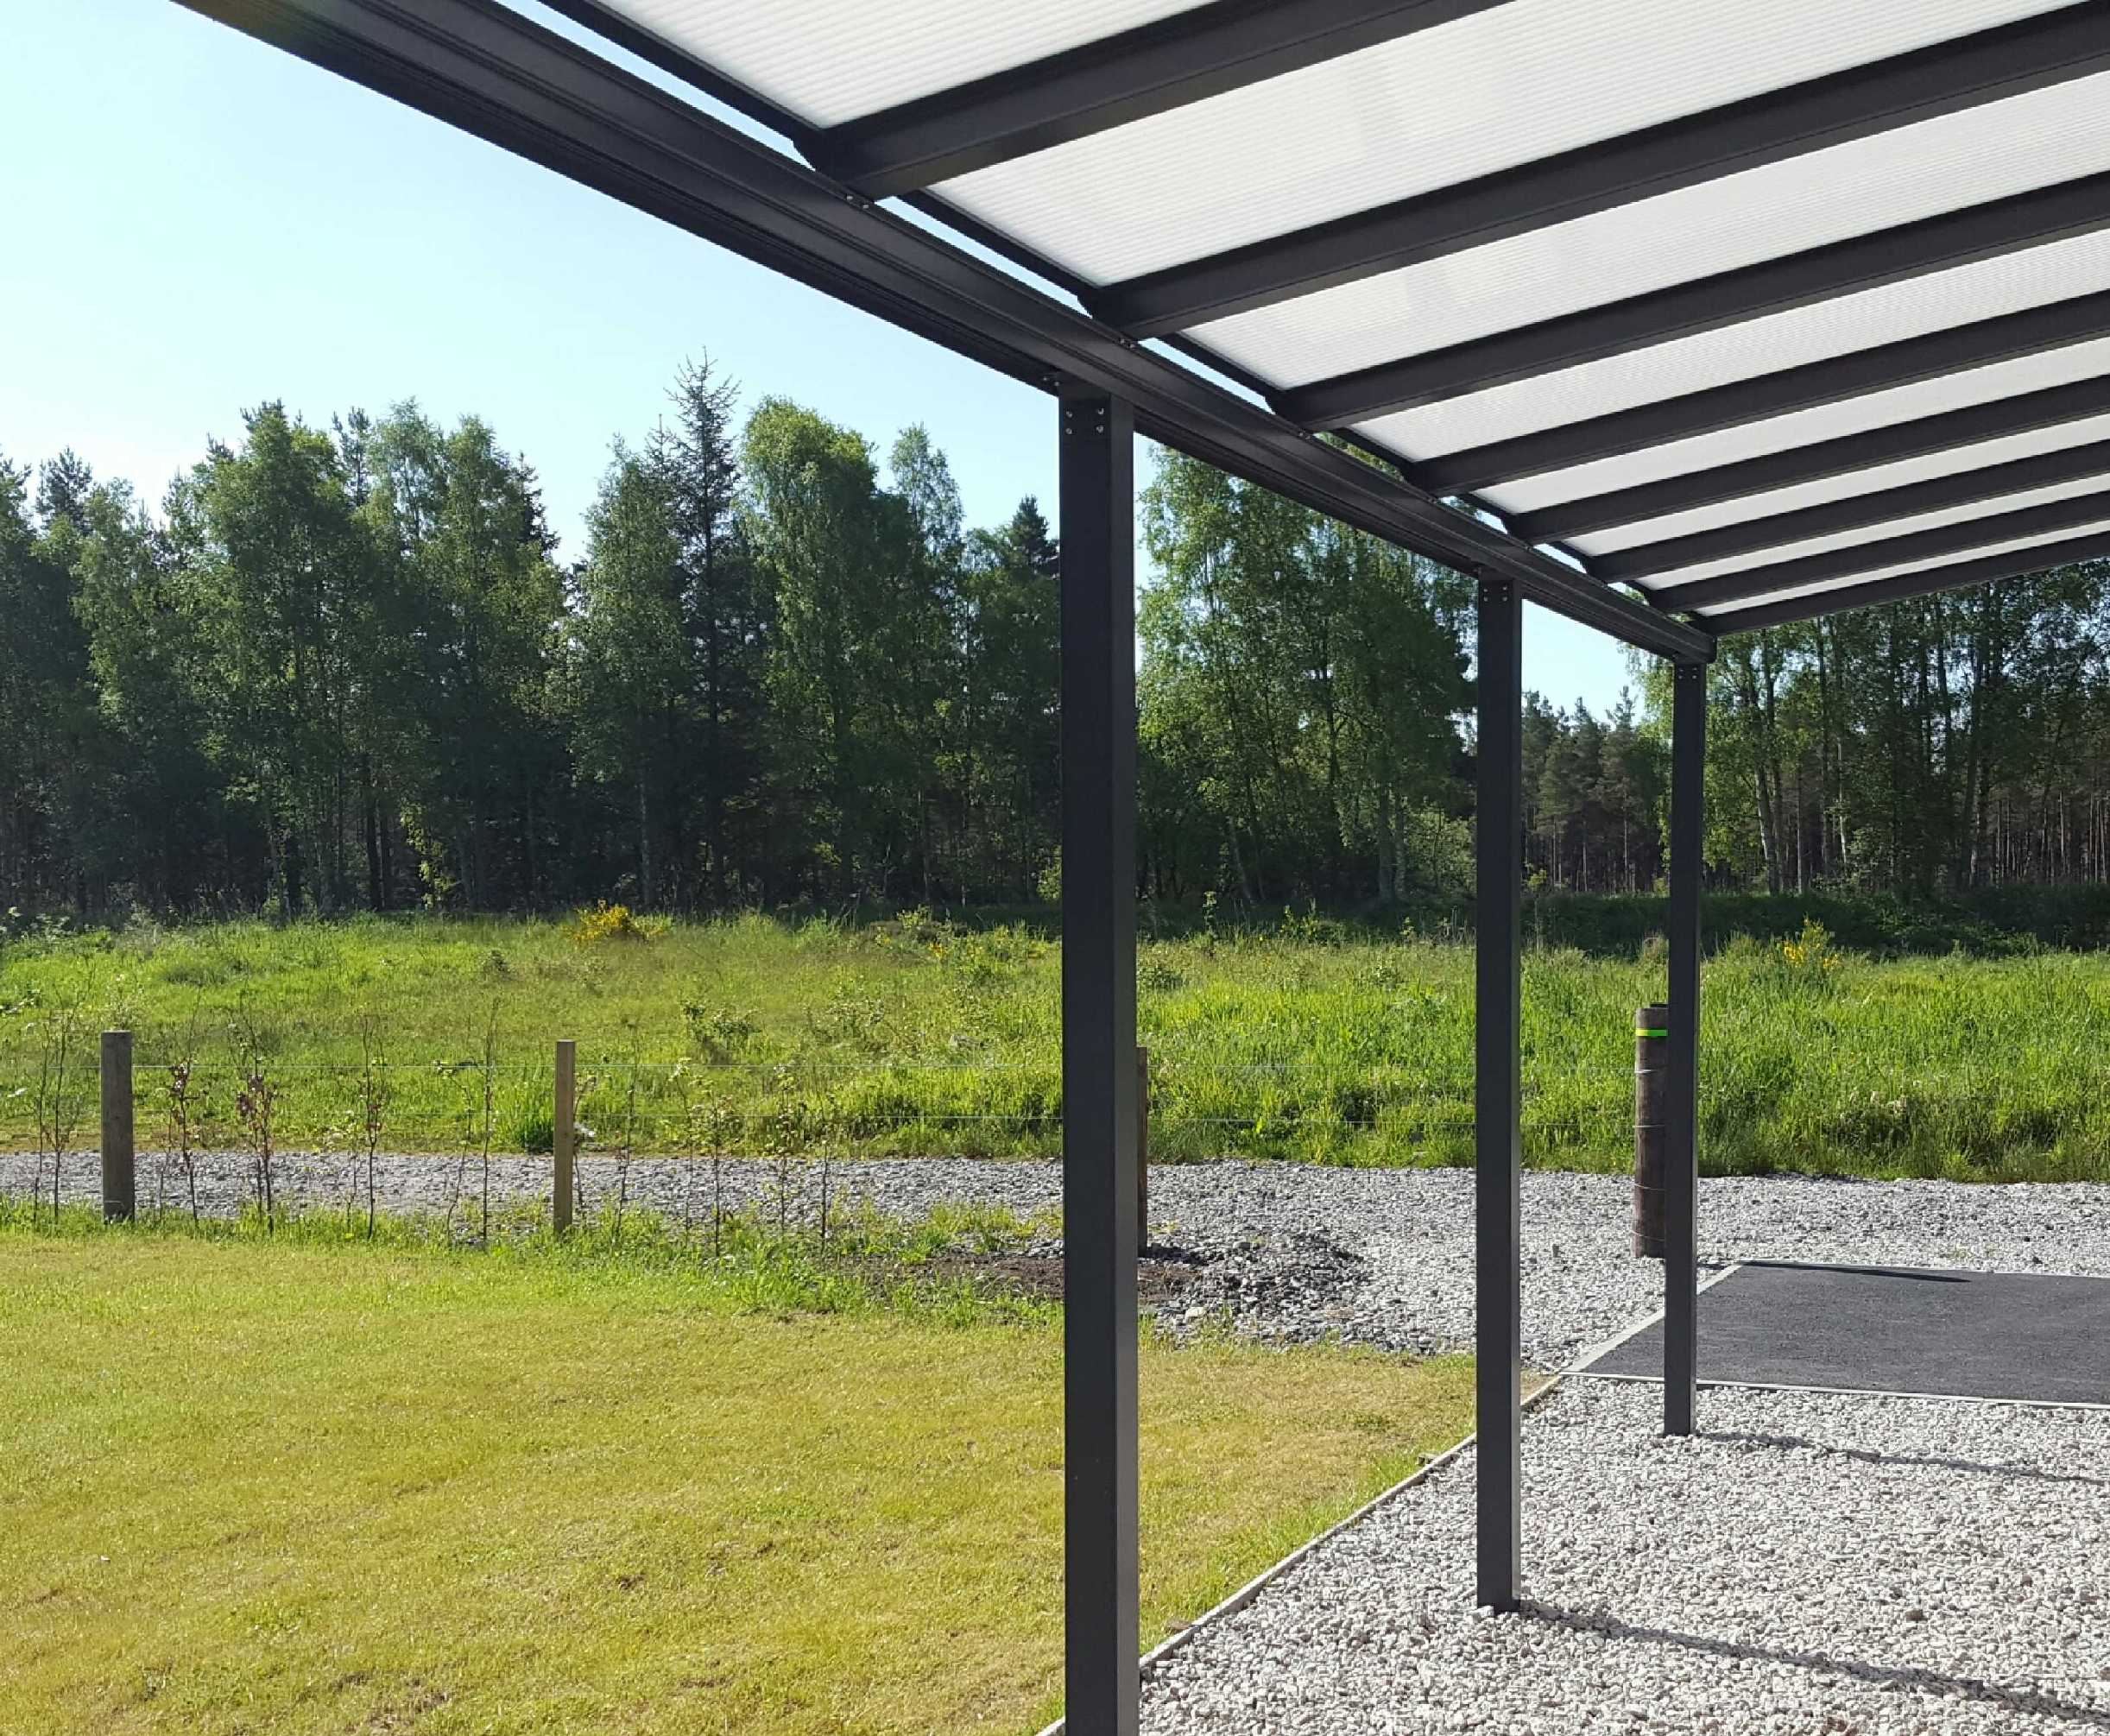 Omega Smart Lean-To Canopy, Anthracite Grey, 6mm Glass Clear Plate Polycarbonate Glazing - 9.8m (W) x 1.5m (P), (5) Supporting Posts